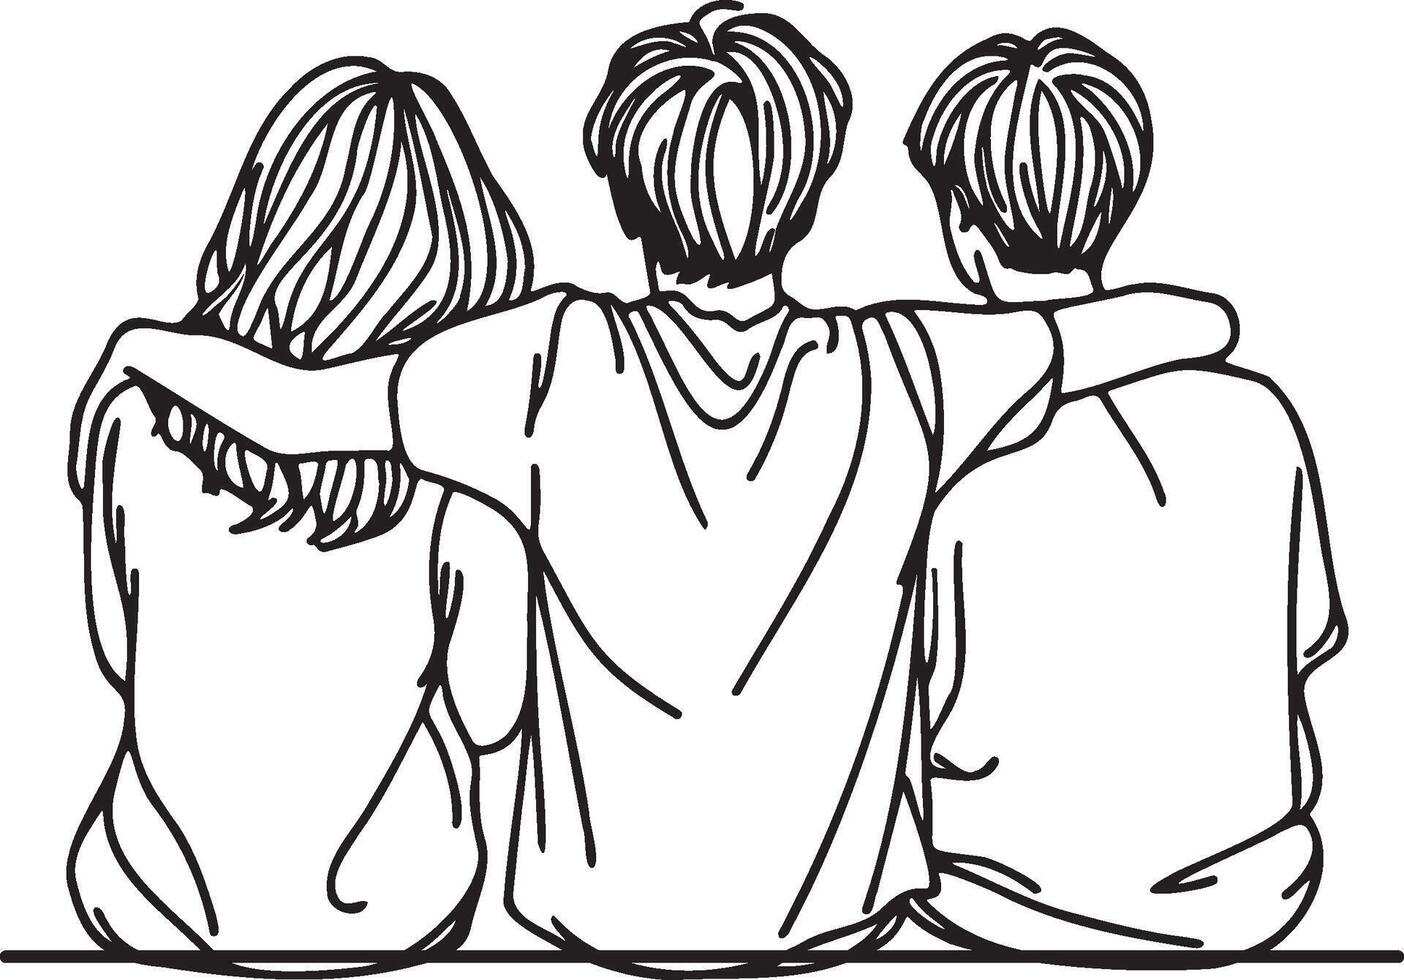 Friends Sketch Drawing. vector